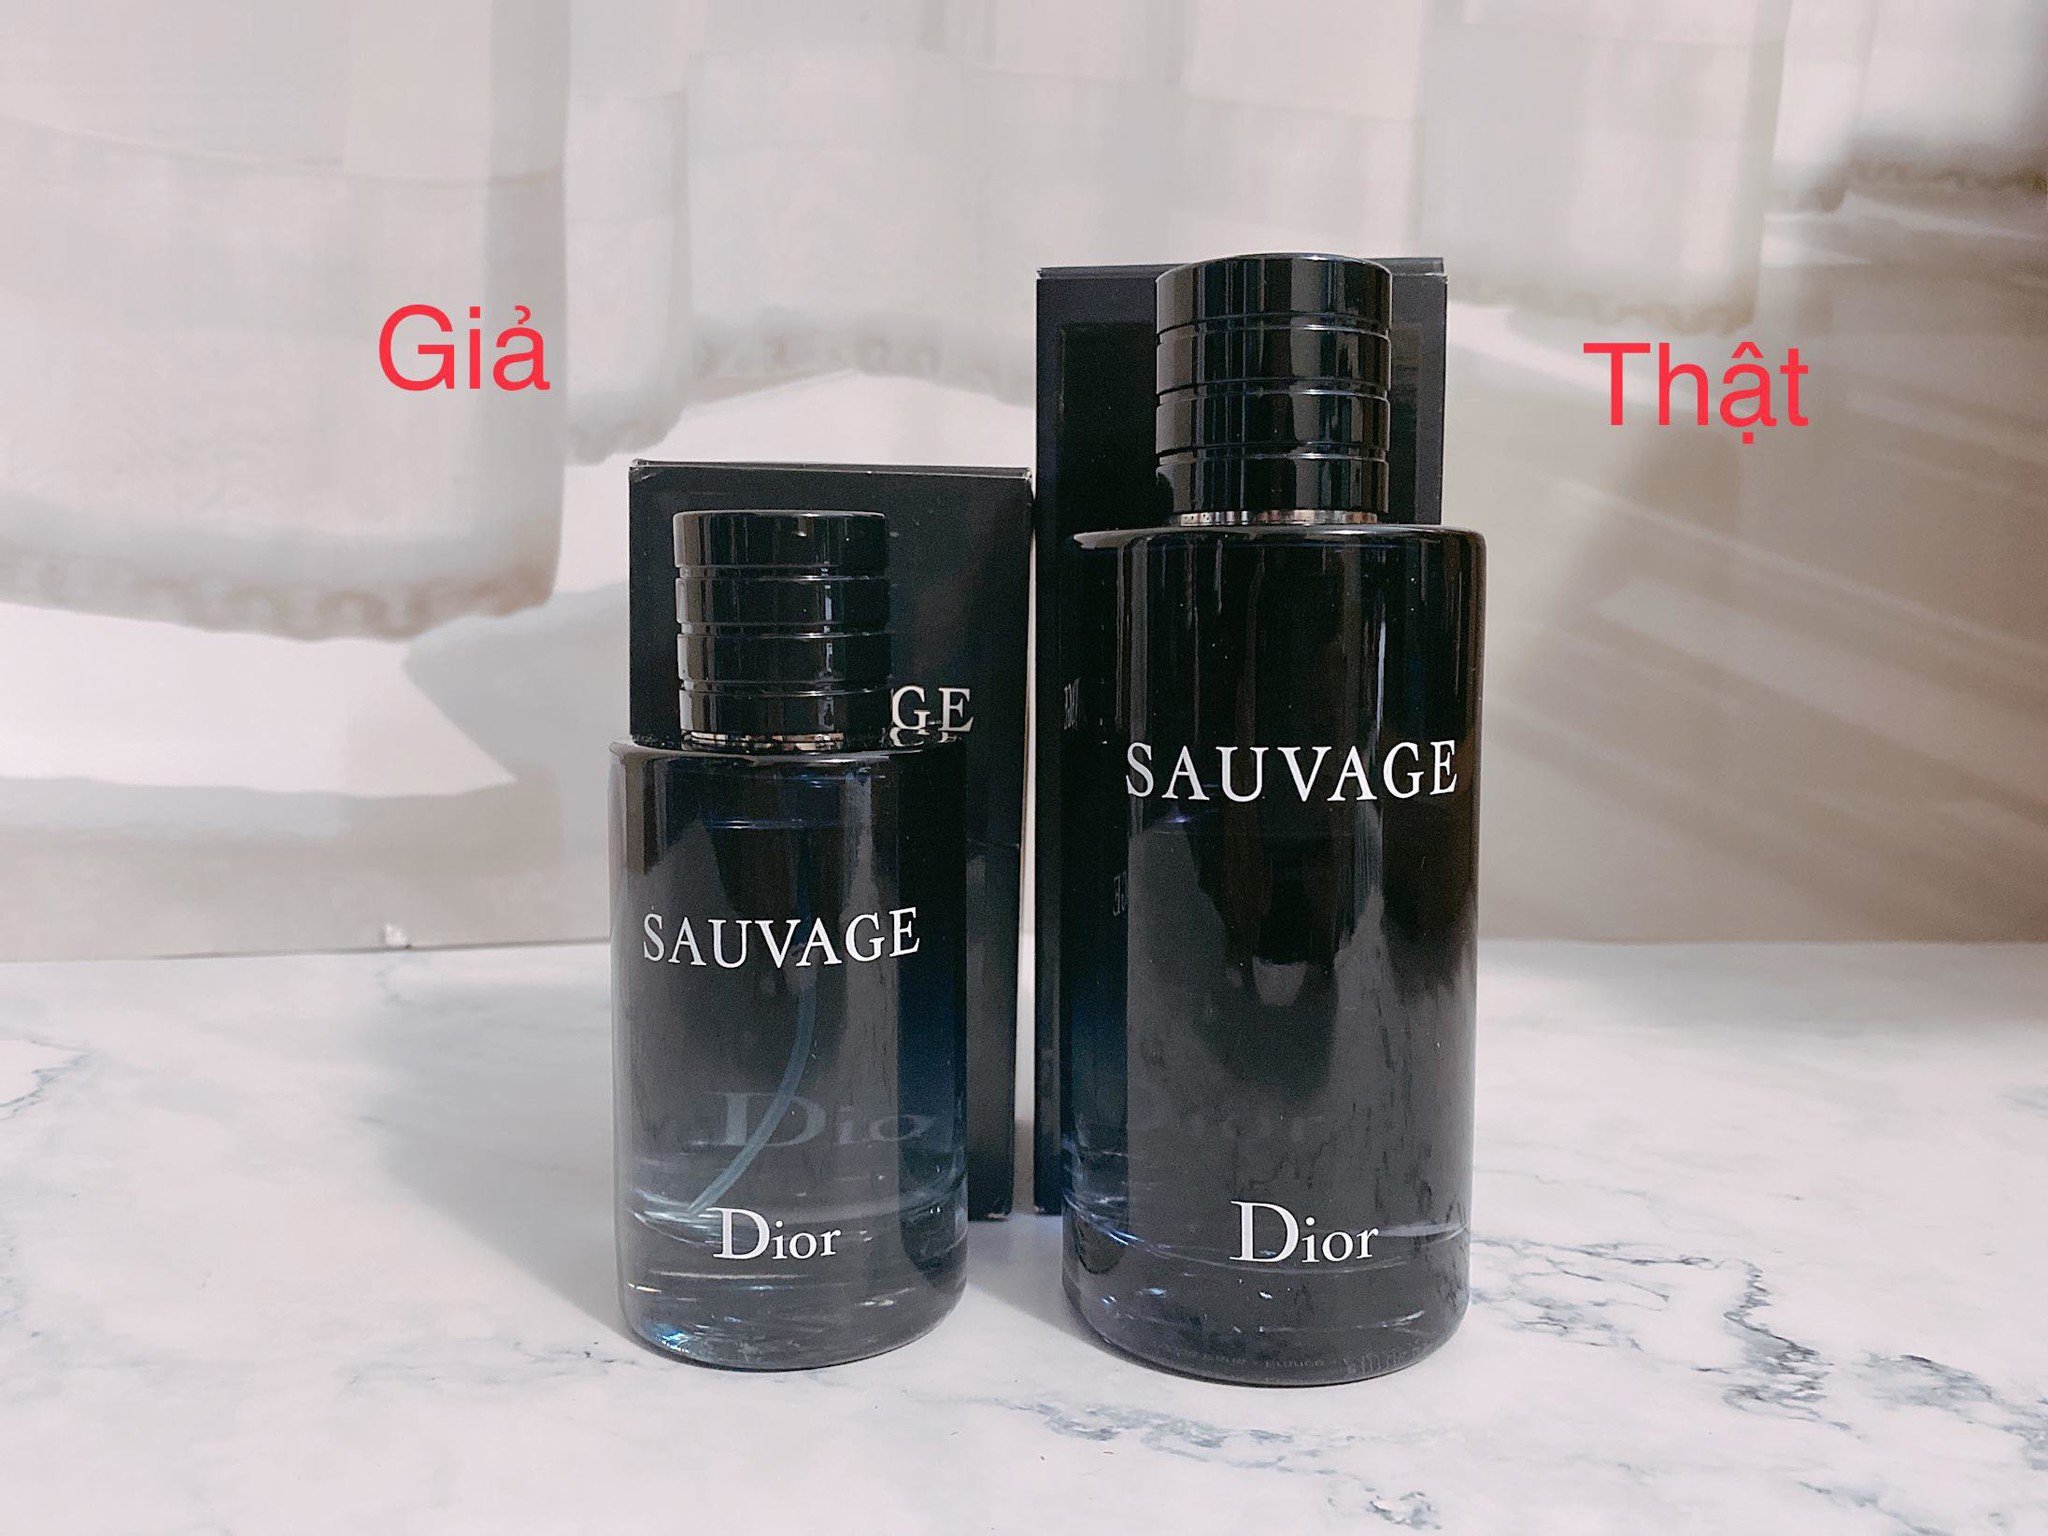 How to Identify Real Dior Sauvage Perfume